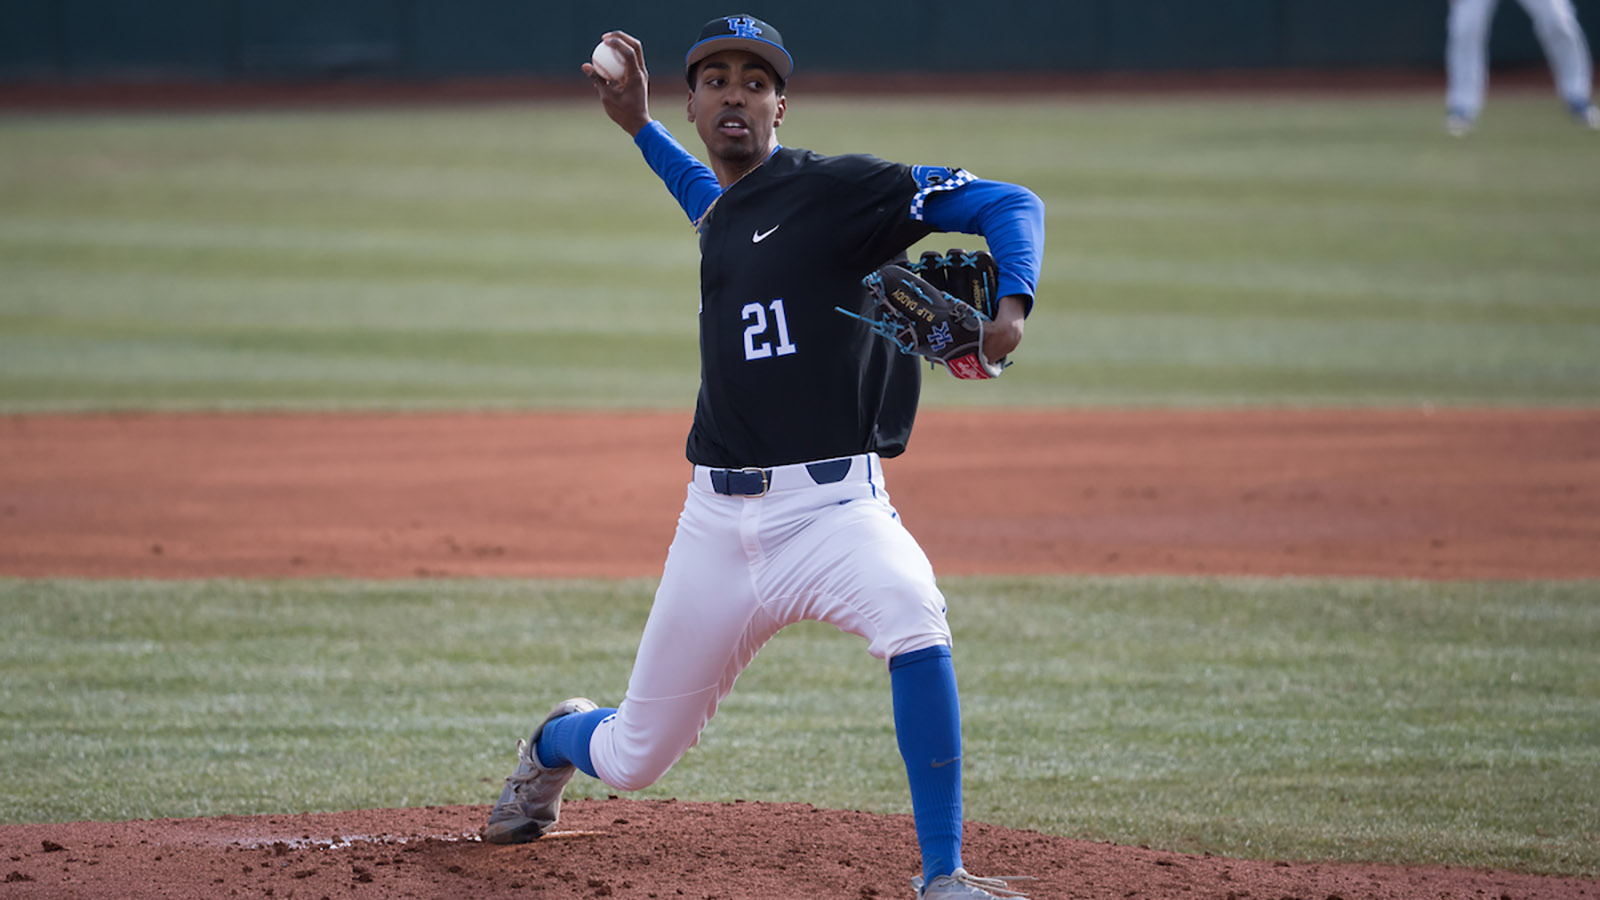 Sunday Funday: Justin Lewis Pitches Cats to Win on Easter